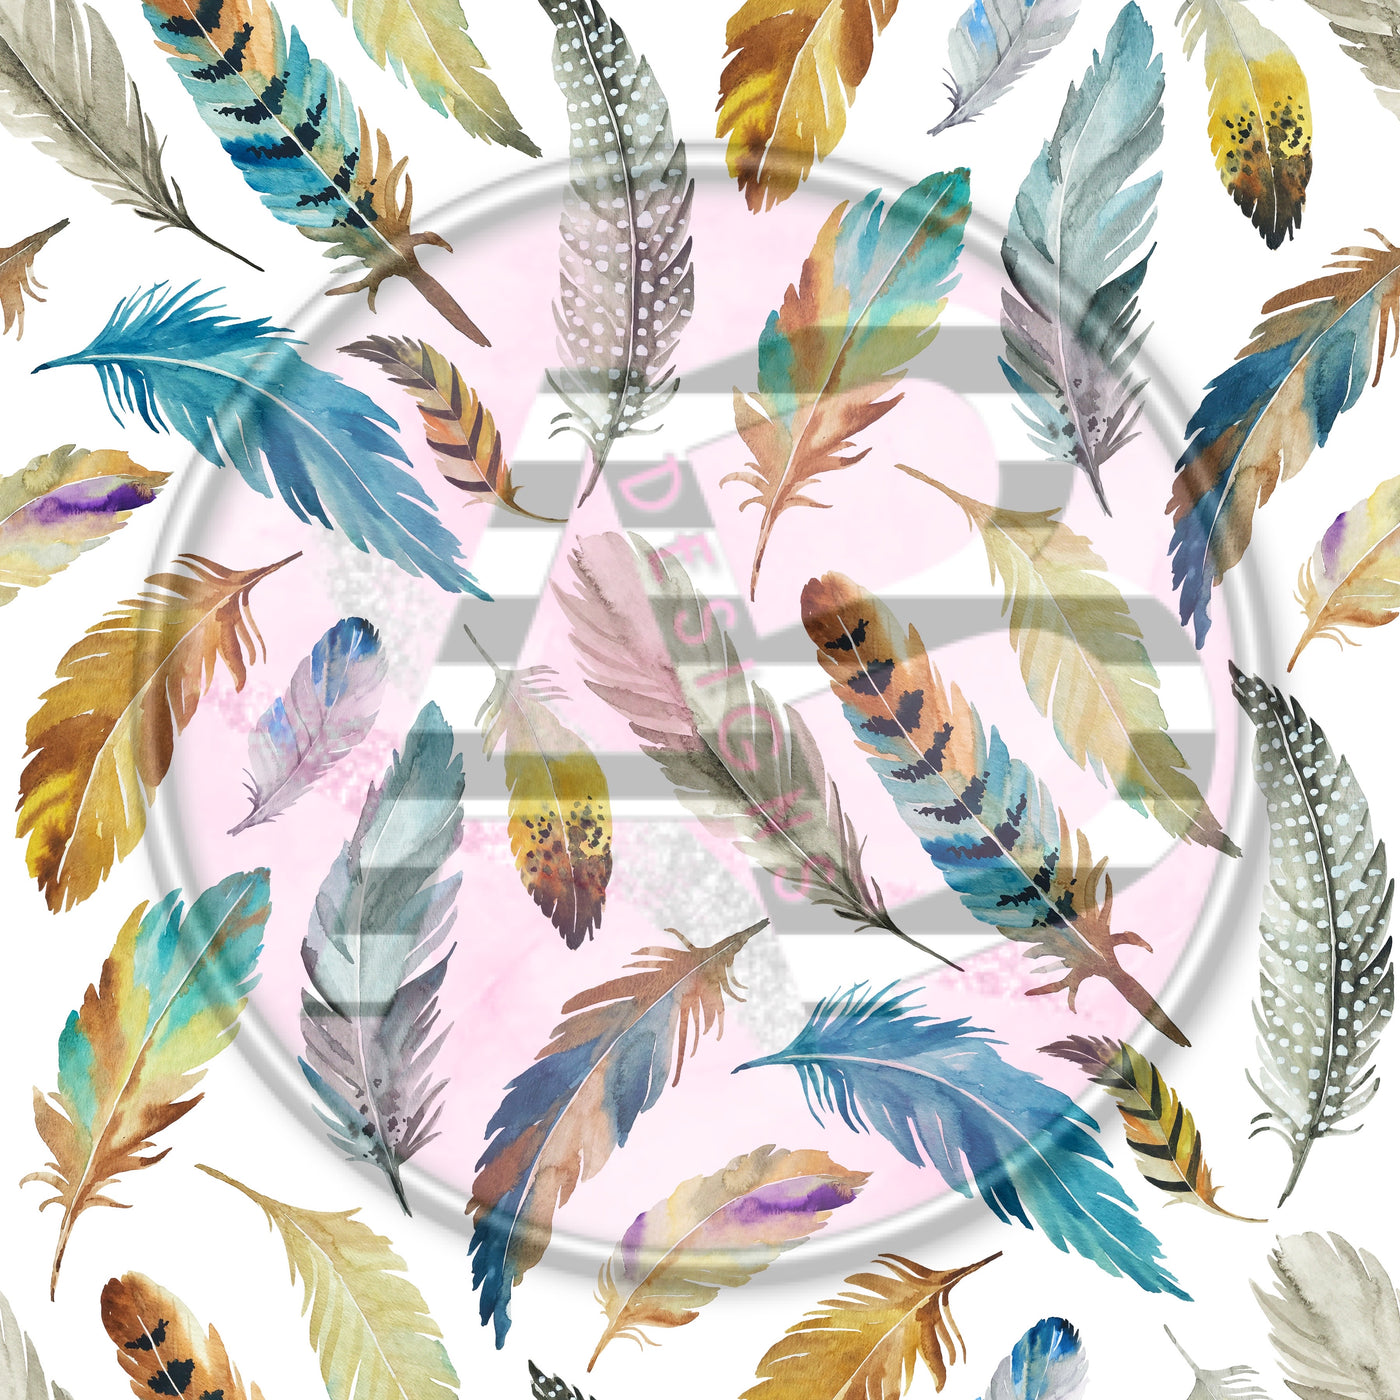 Adhesive Patterned Vinyl - Feathers 286